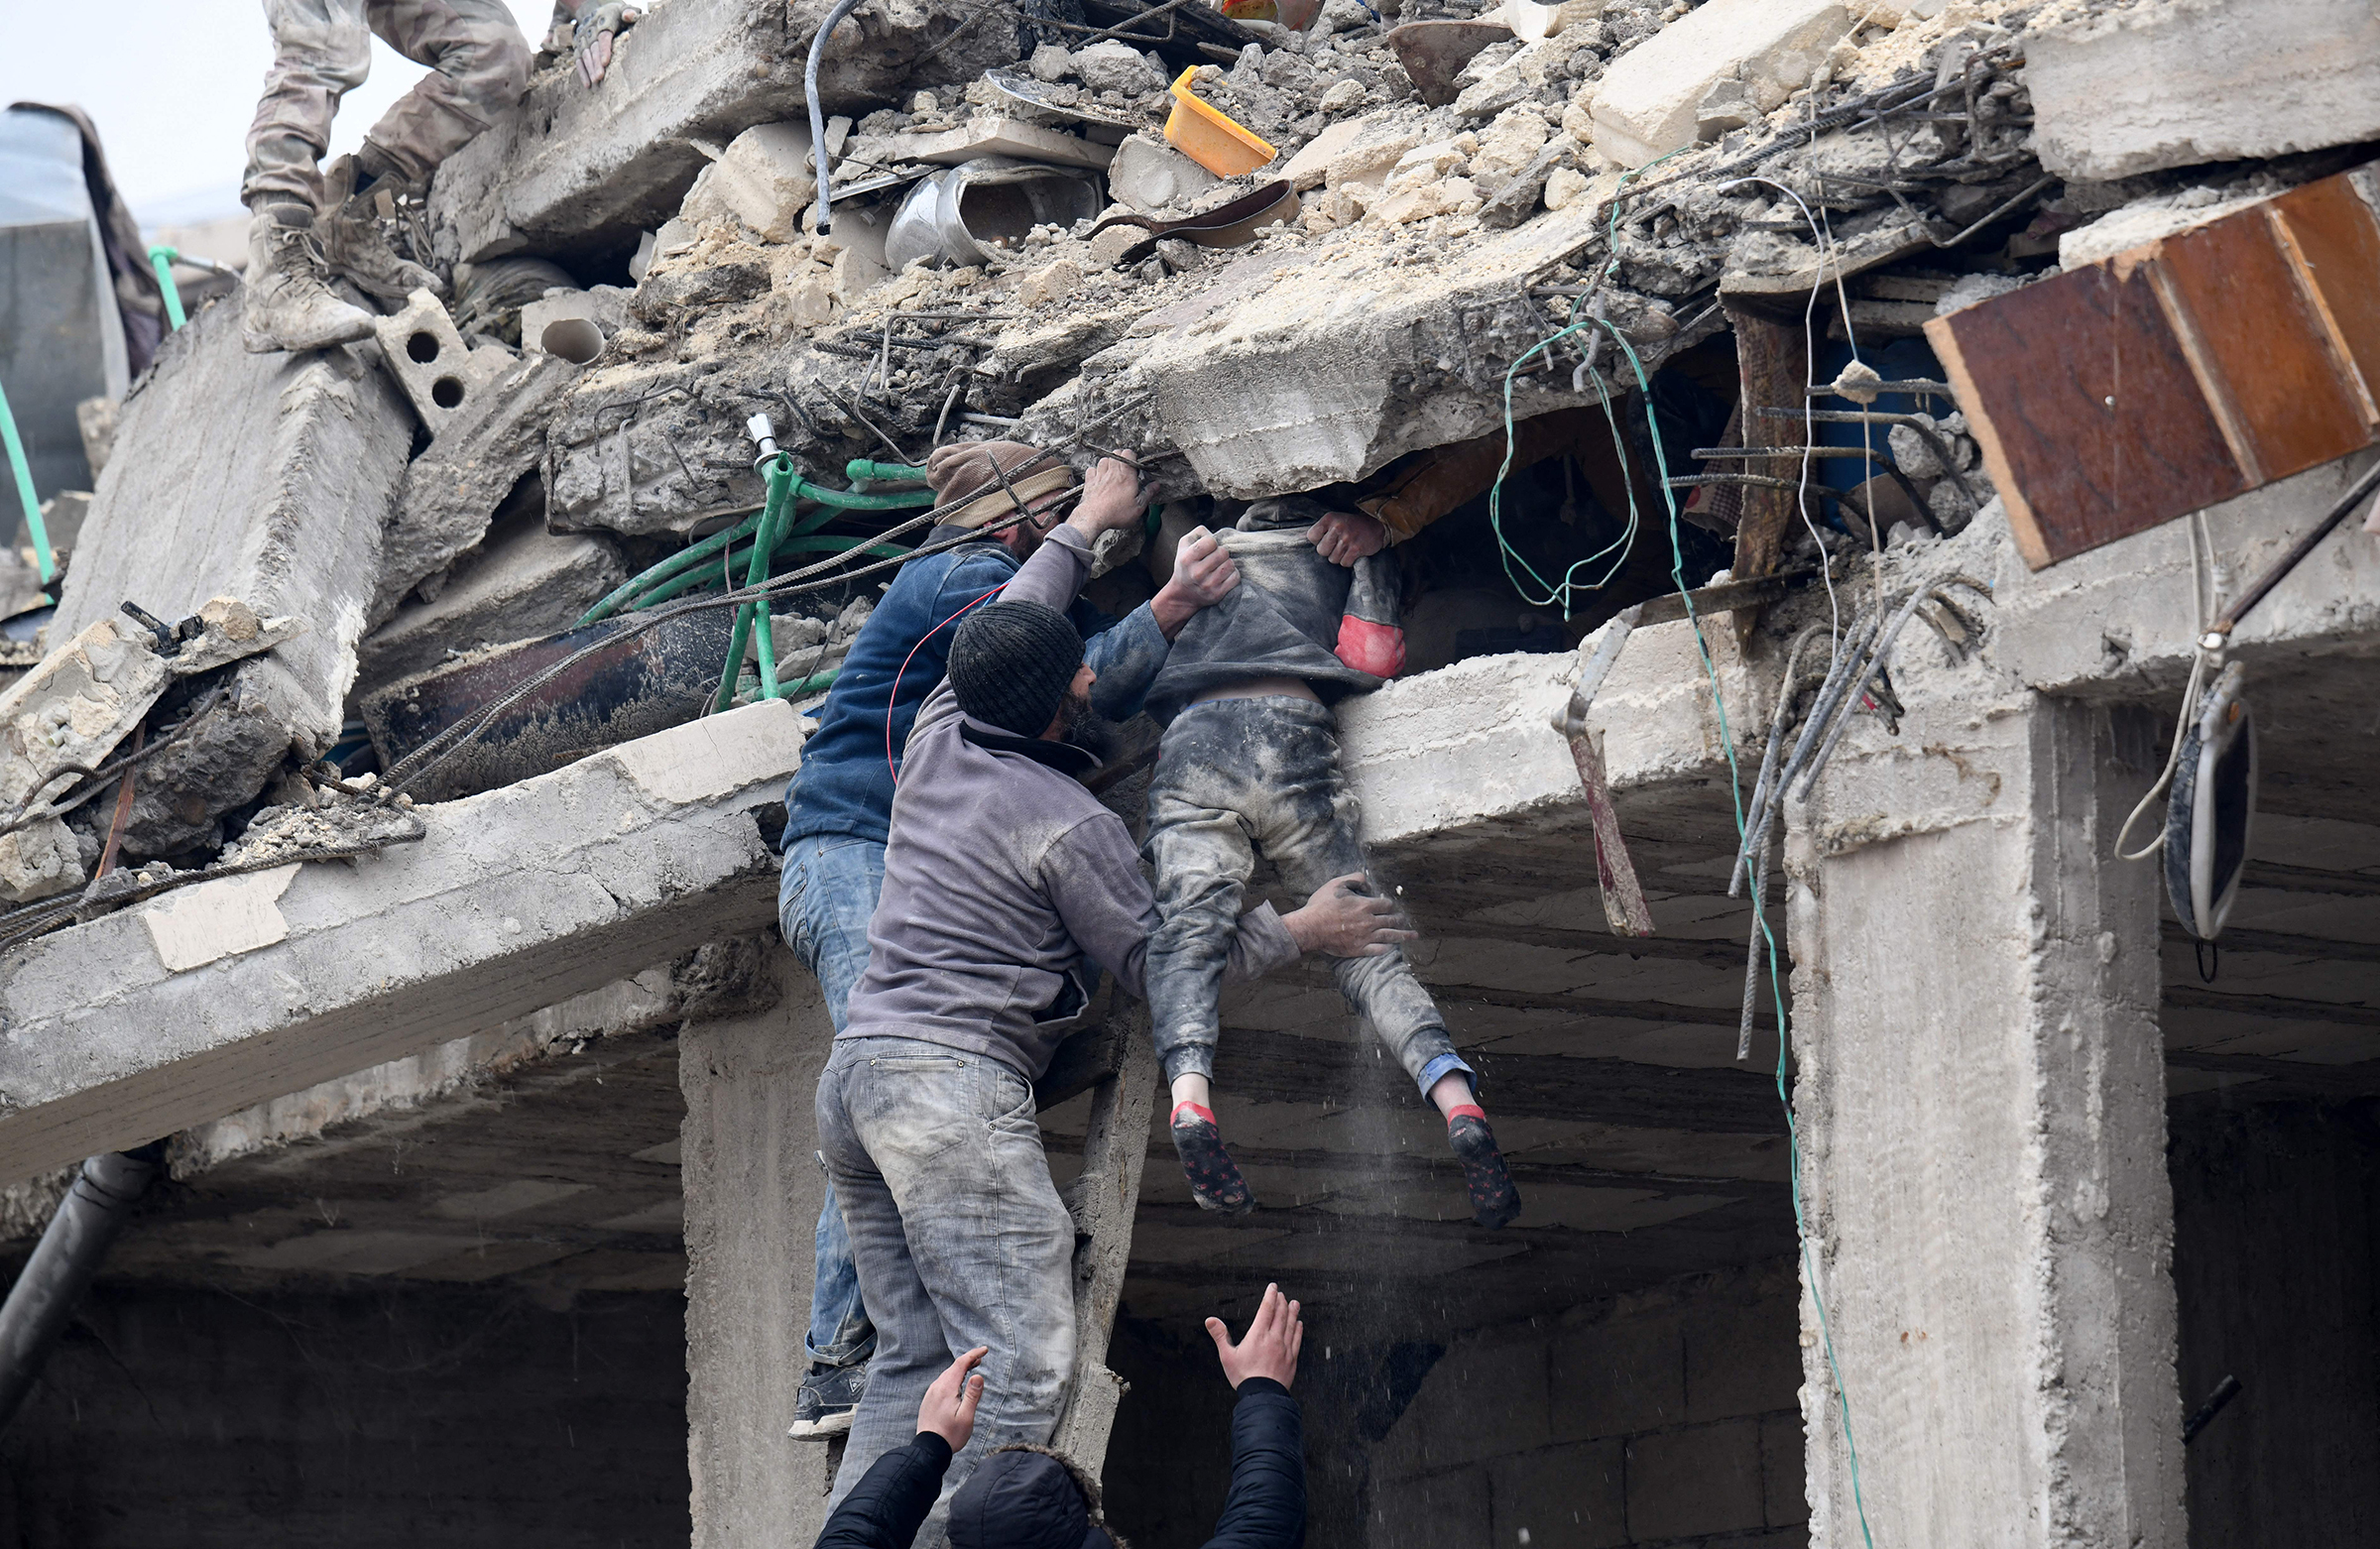 Residents retrieve an injured girl from the rubble of a collapsed building following an earthquake in the town of Jandaris, in the countryside of Syria's northwestern city of Afrin i (Rami Al Sayed—AFP/Getty Images)